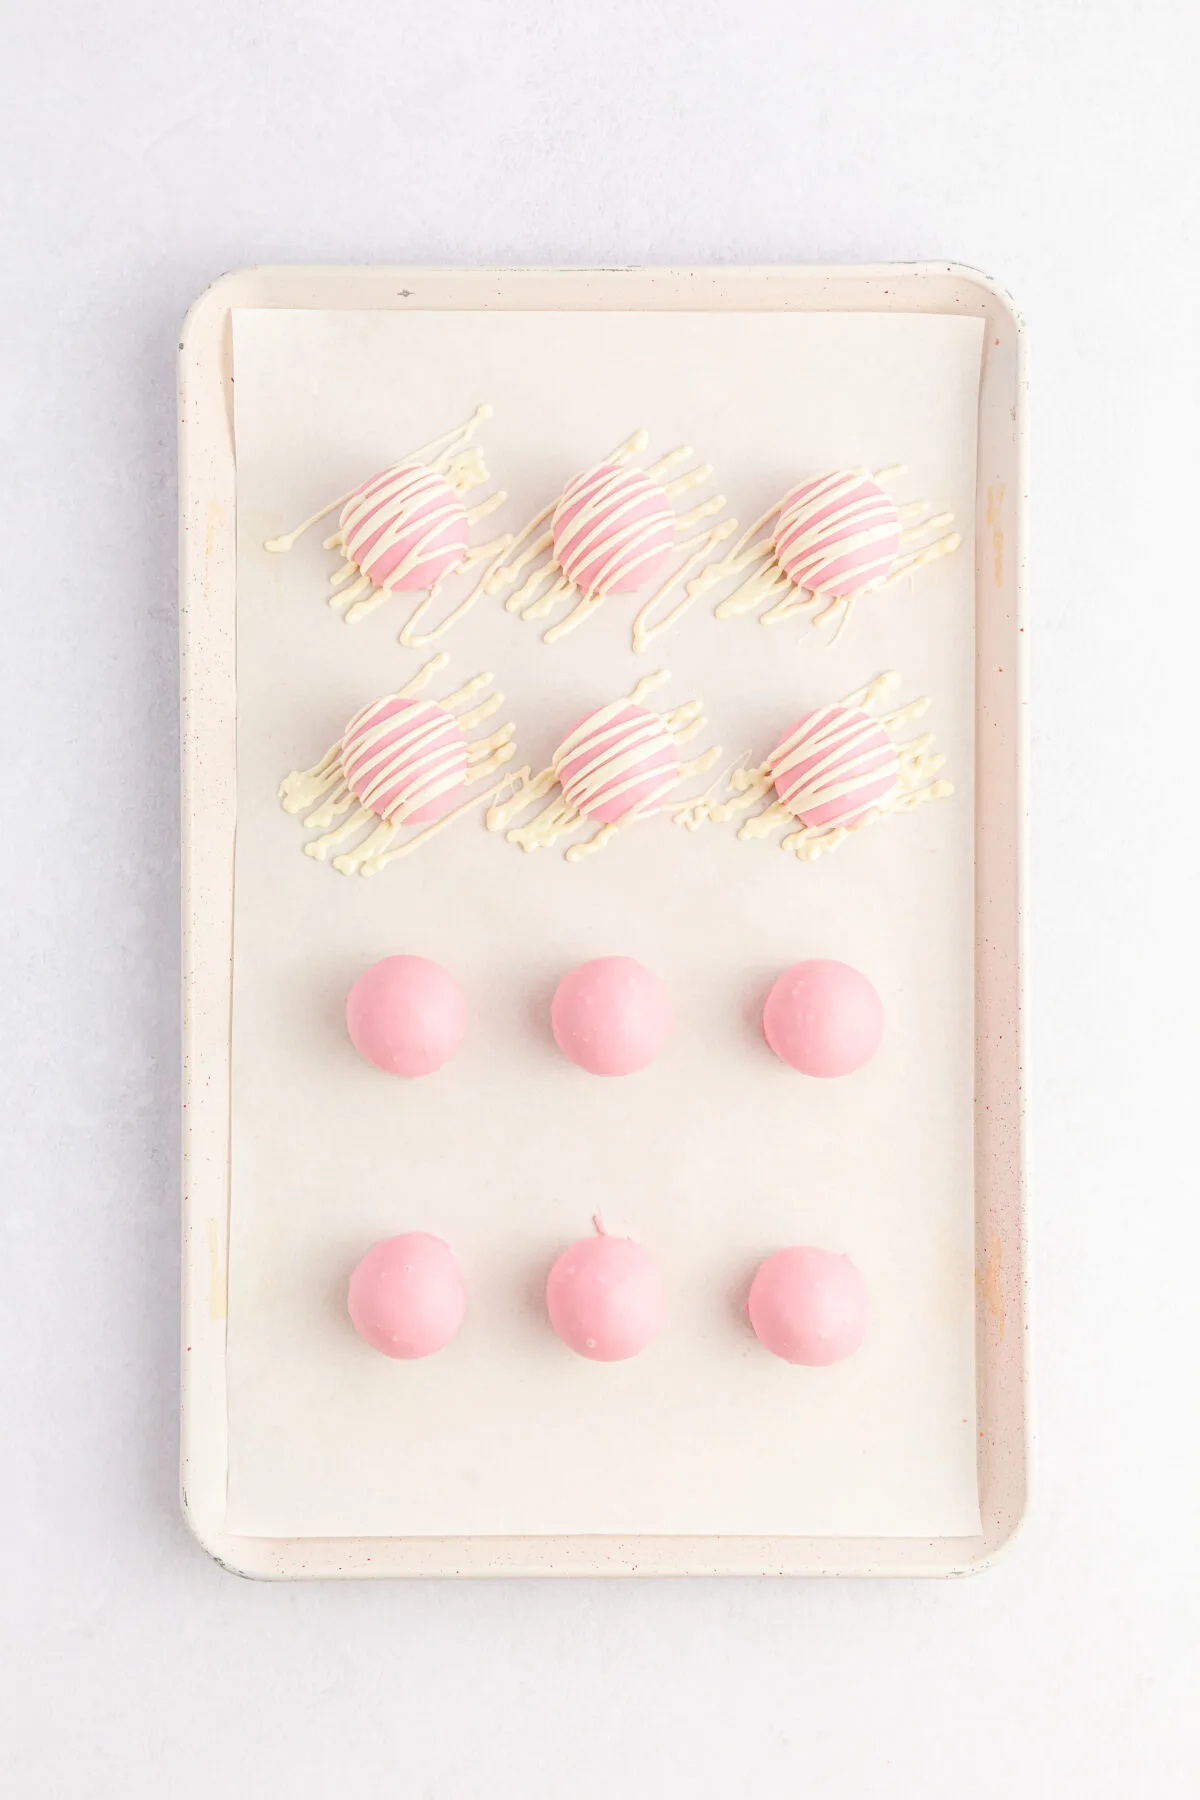 Candy coated dough balls on a sheet pan, half drizzled over with white chocolate.